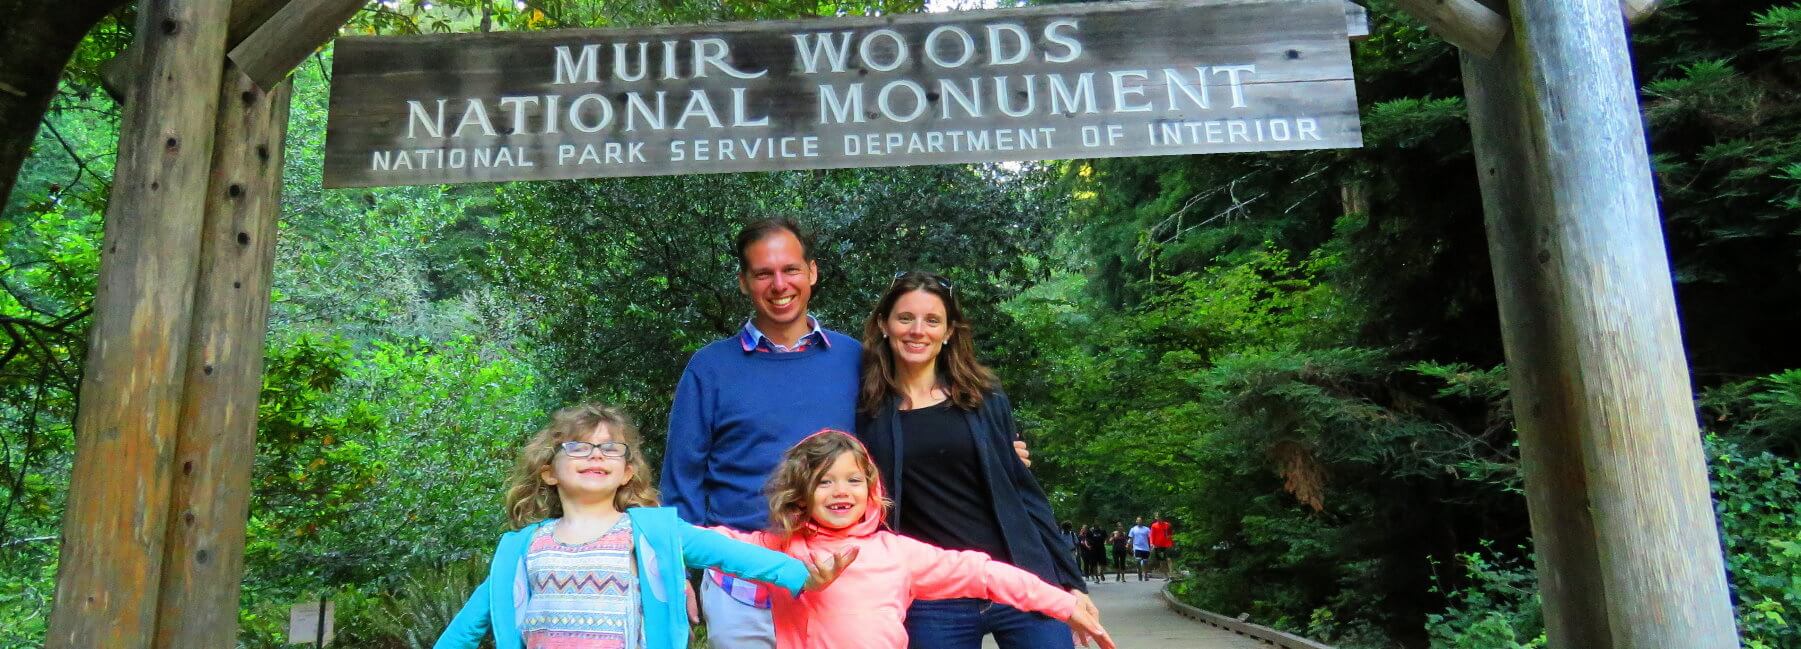 muir_woods_park_of_redwoods_trees_day_trip_with_kids